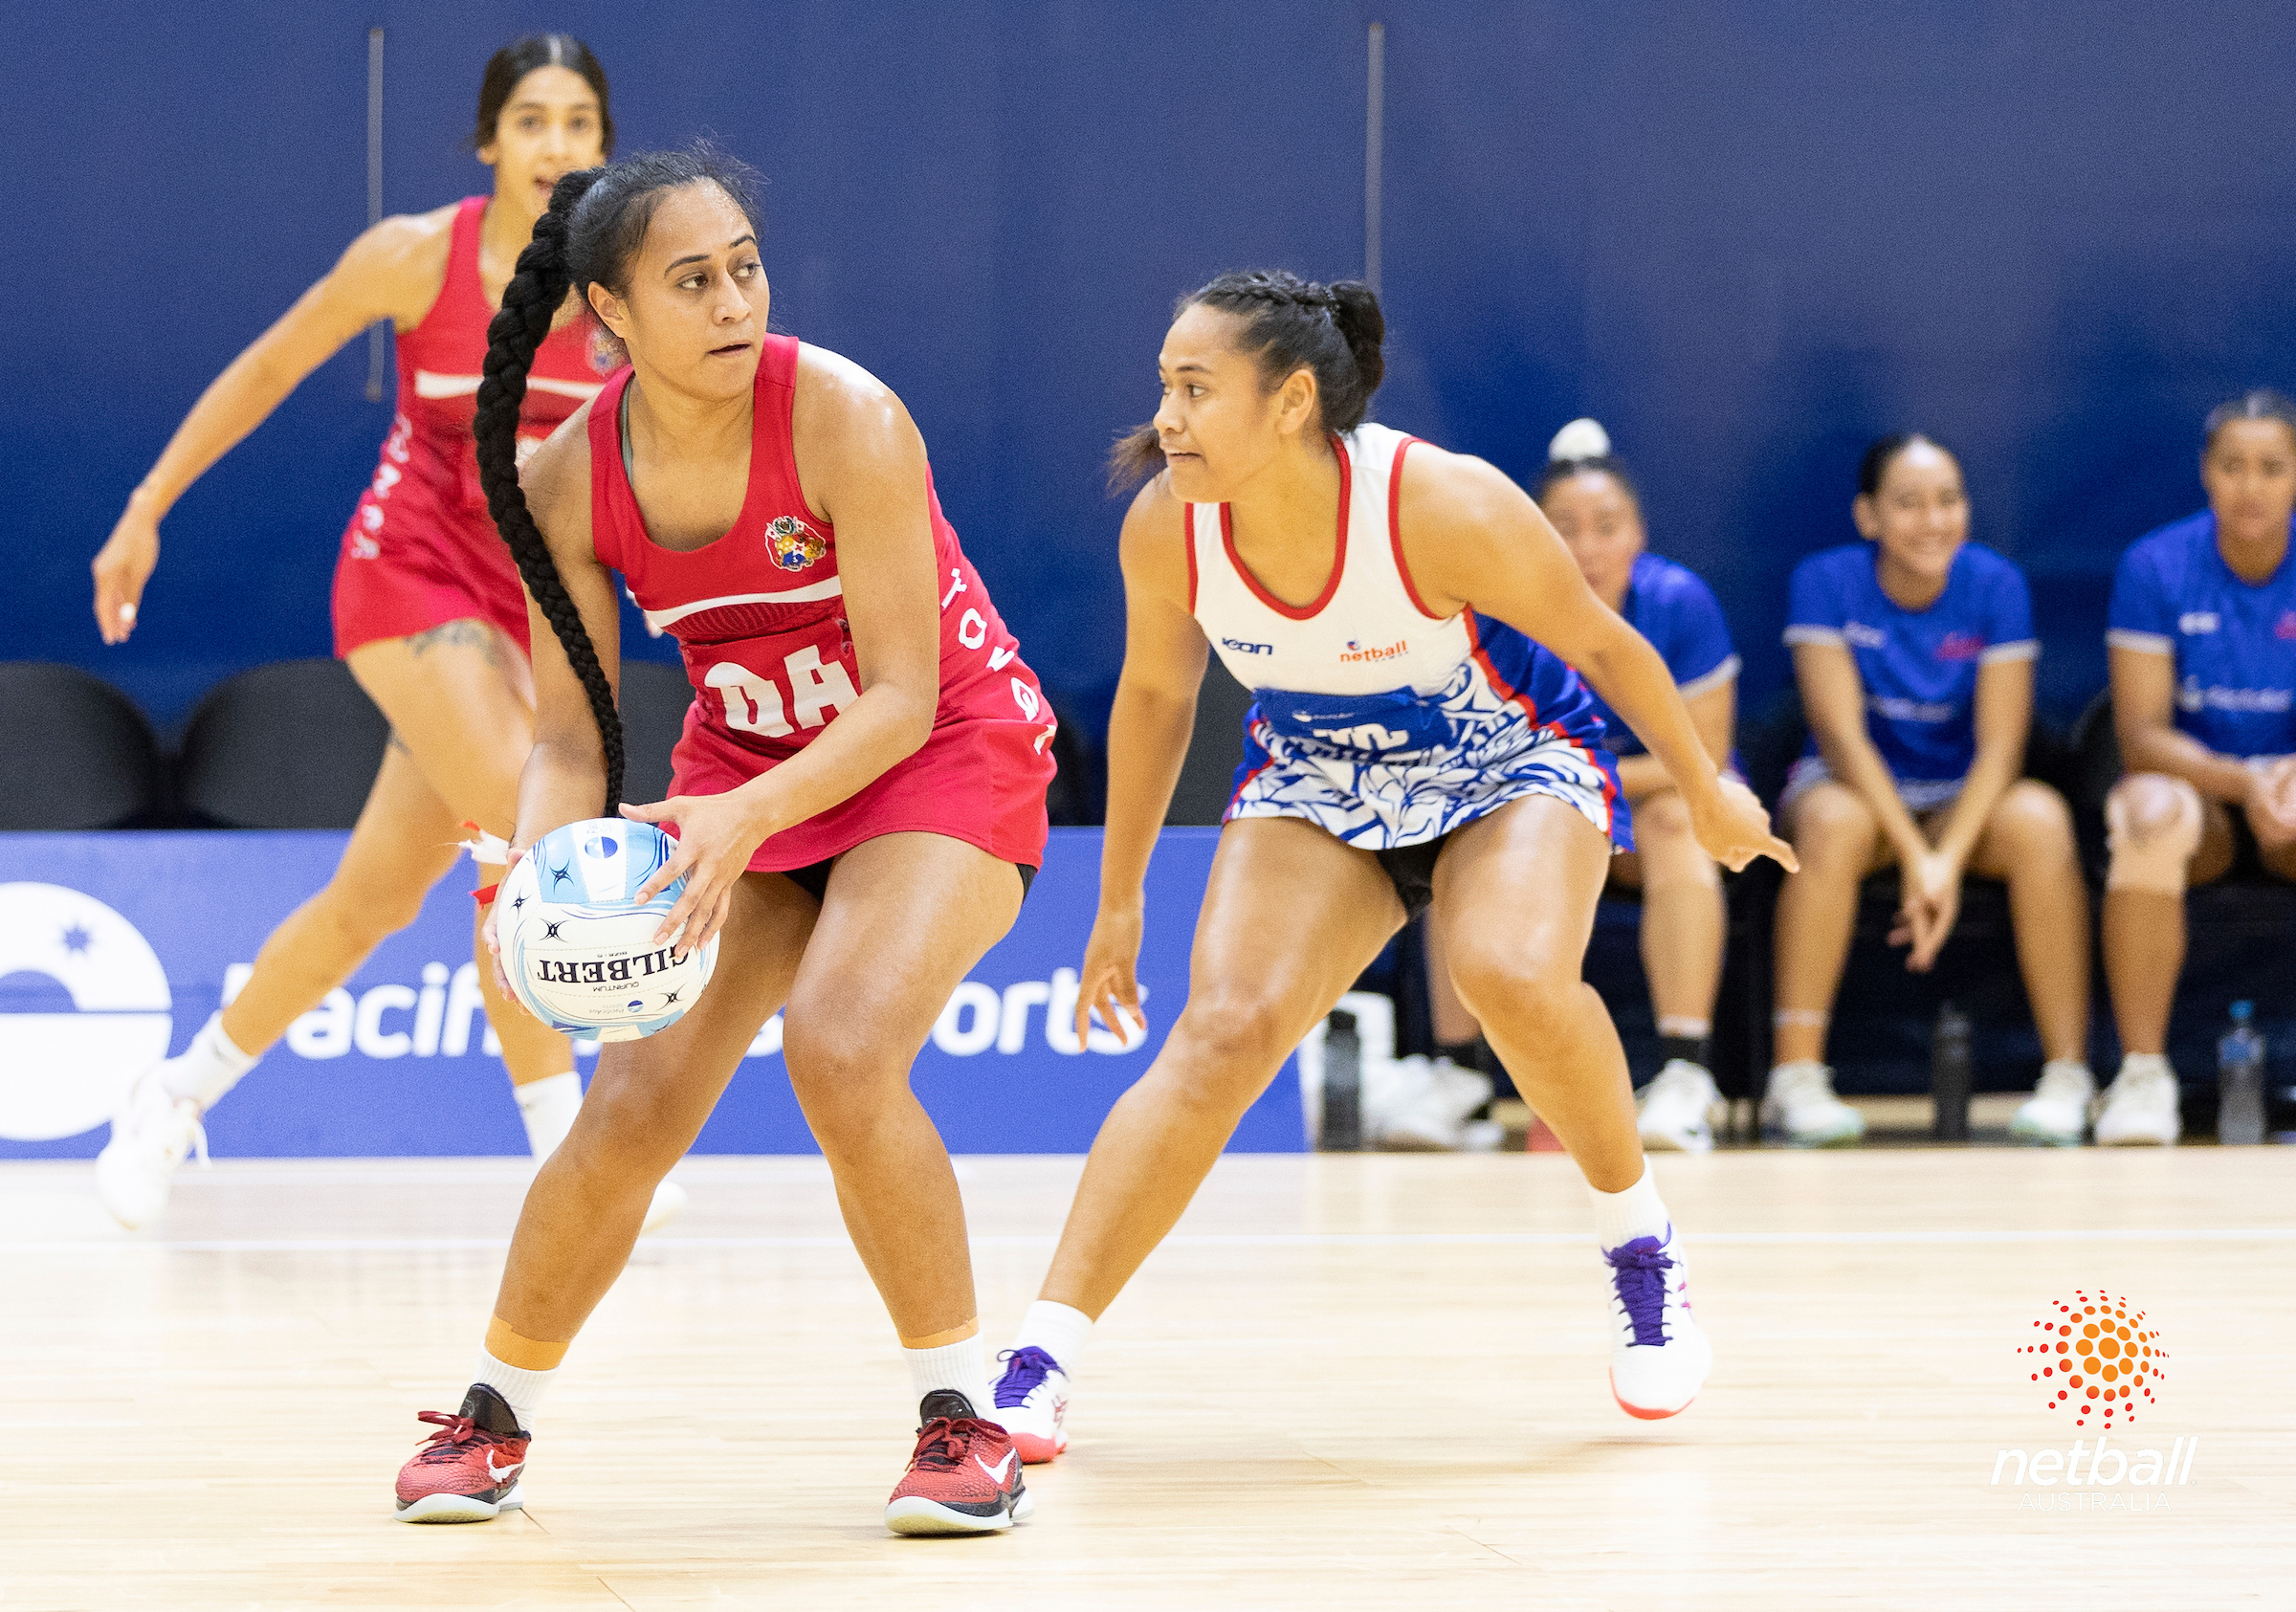 Tonga went through the recent PacificAus tournament undefeated.